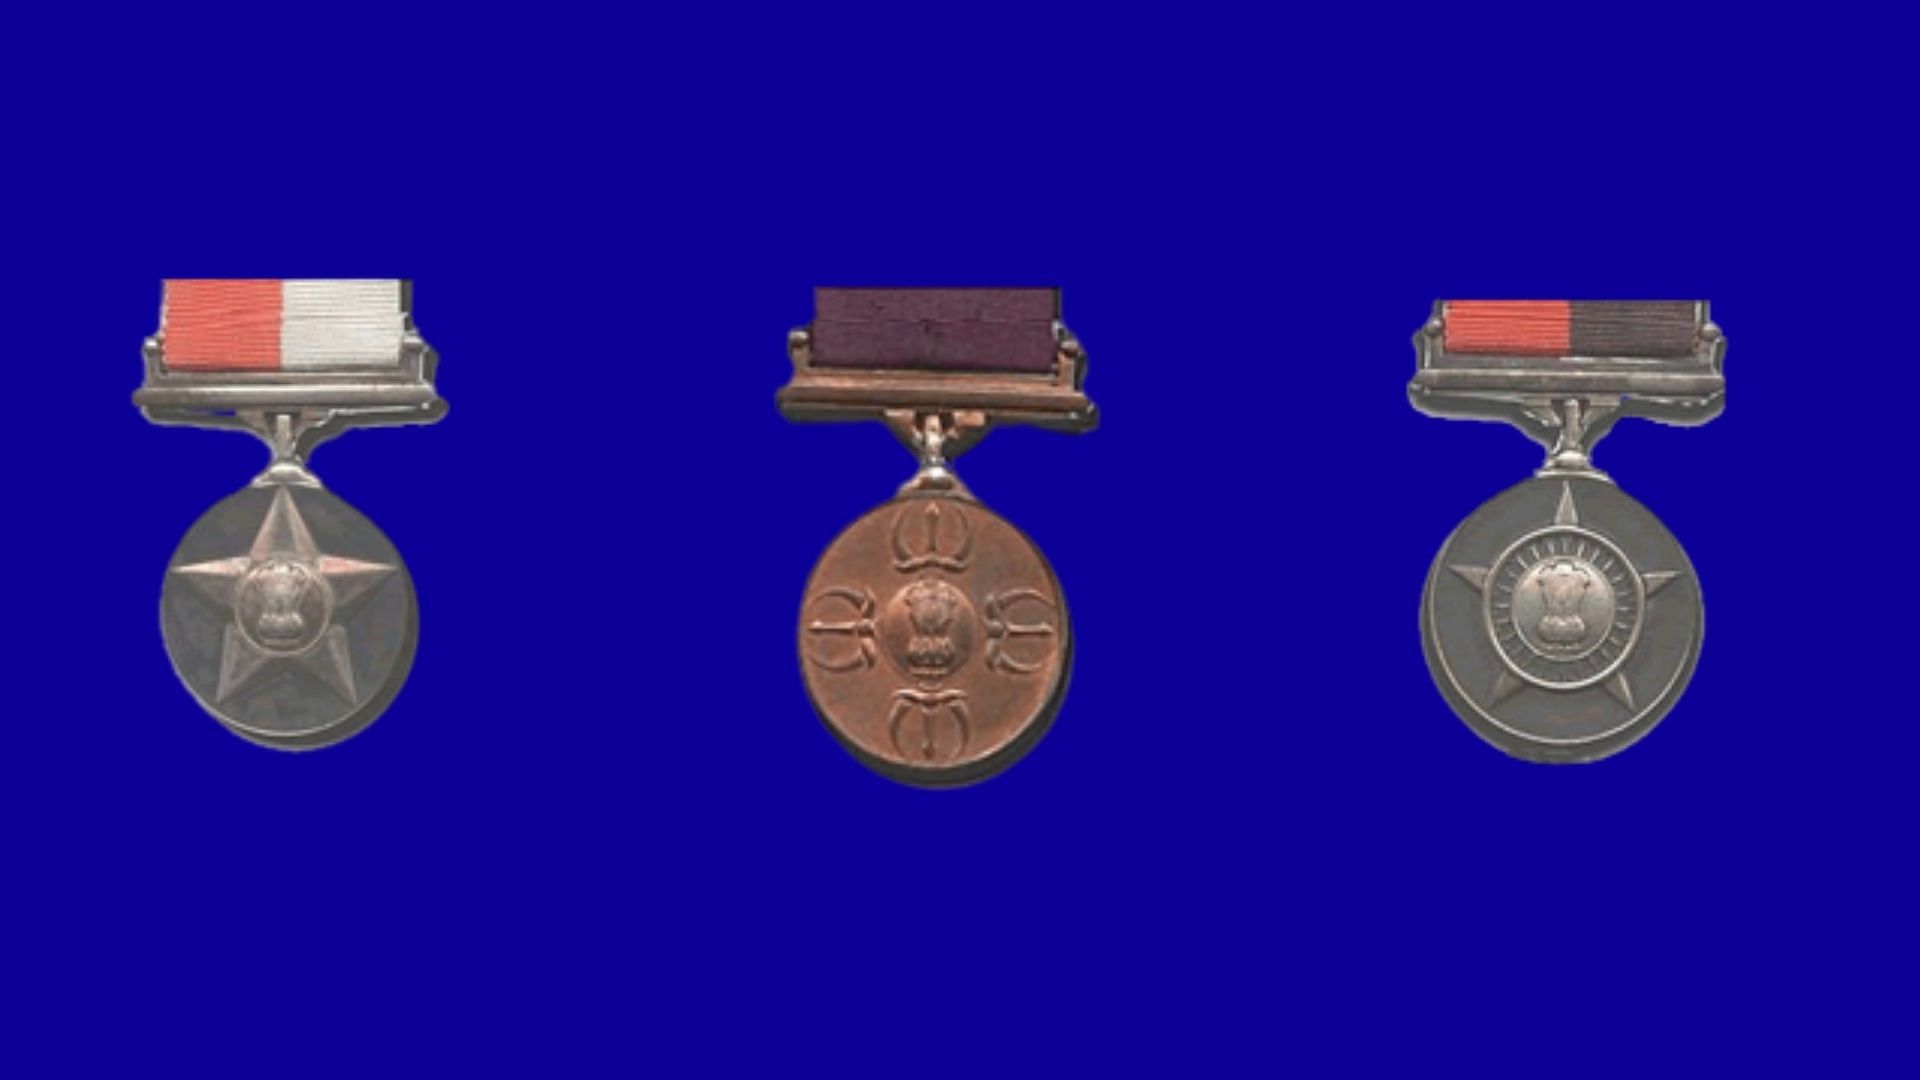 Image of gallantry medals used for representation purpose.